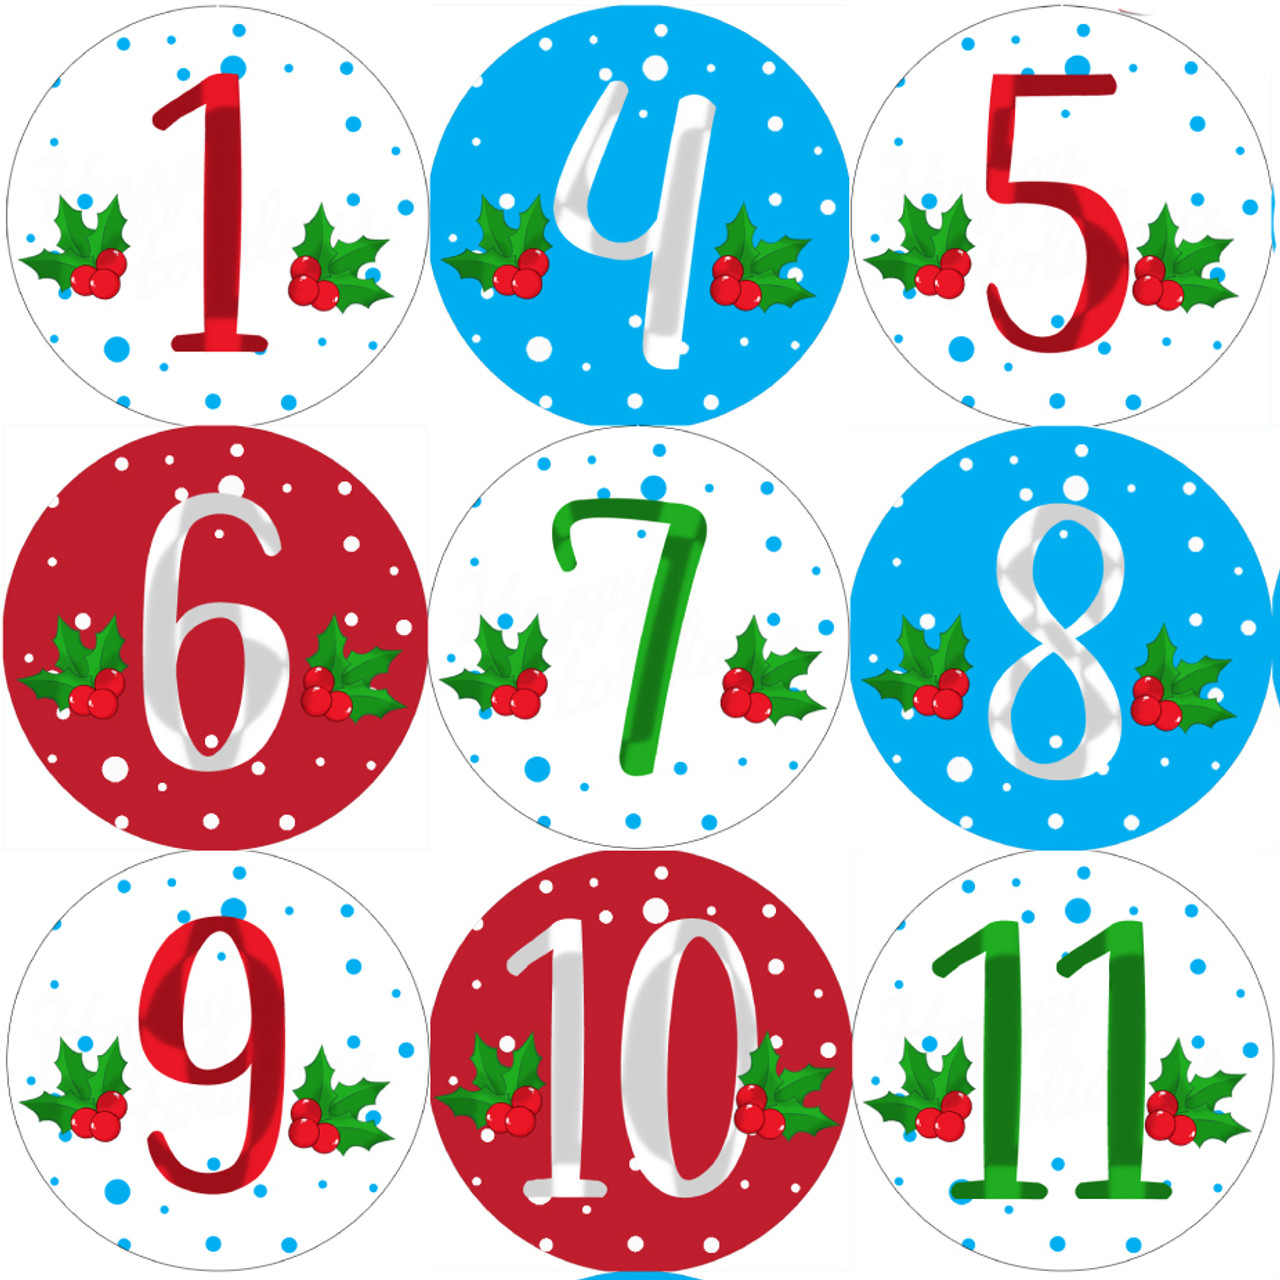 zoon medeklinker mild 144 12 Days of Christmas Countdown Advent Number Stickers 1-12 30mm Glossy  Stickers